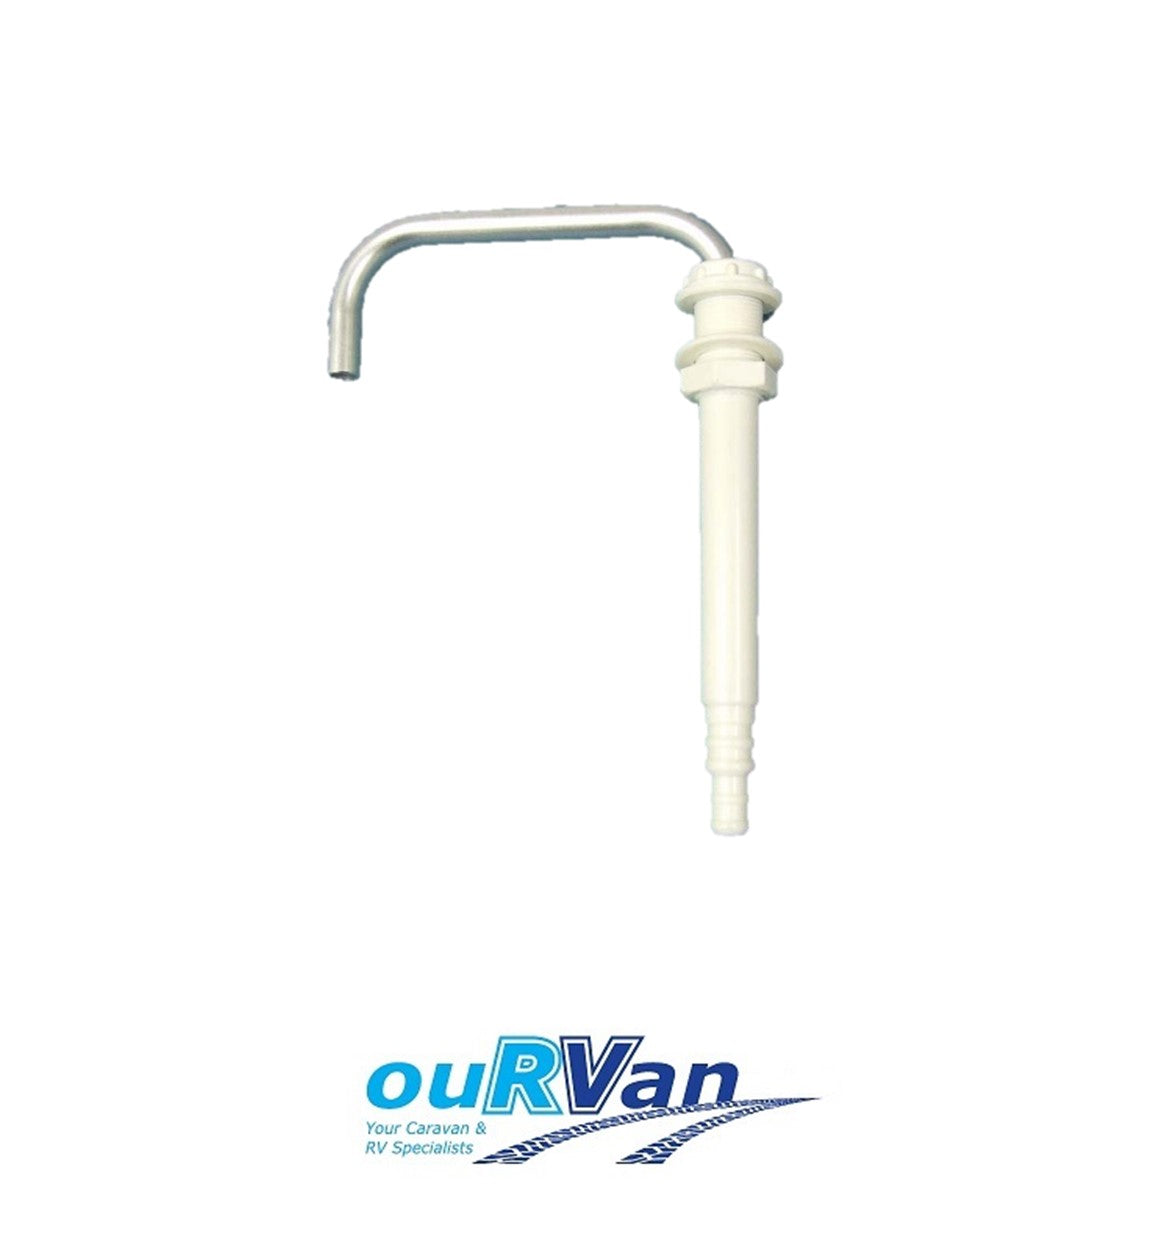 Whale FT1152 Telescopic Faucet Tap Standard White